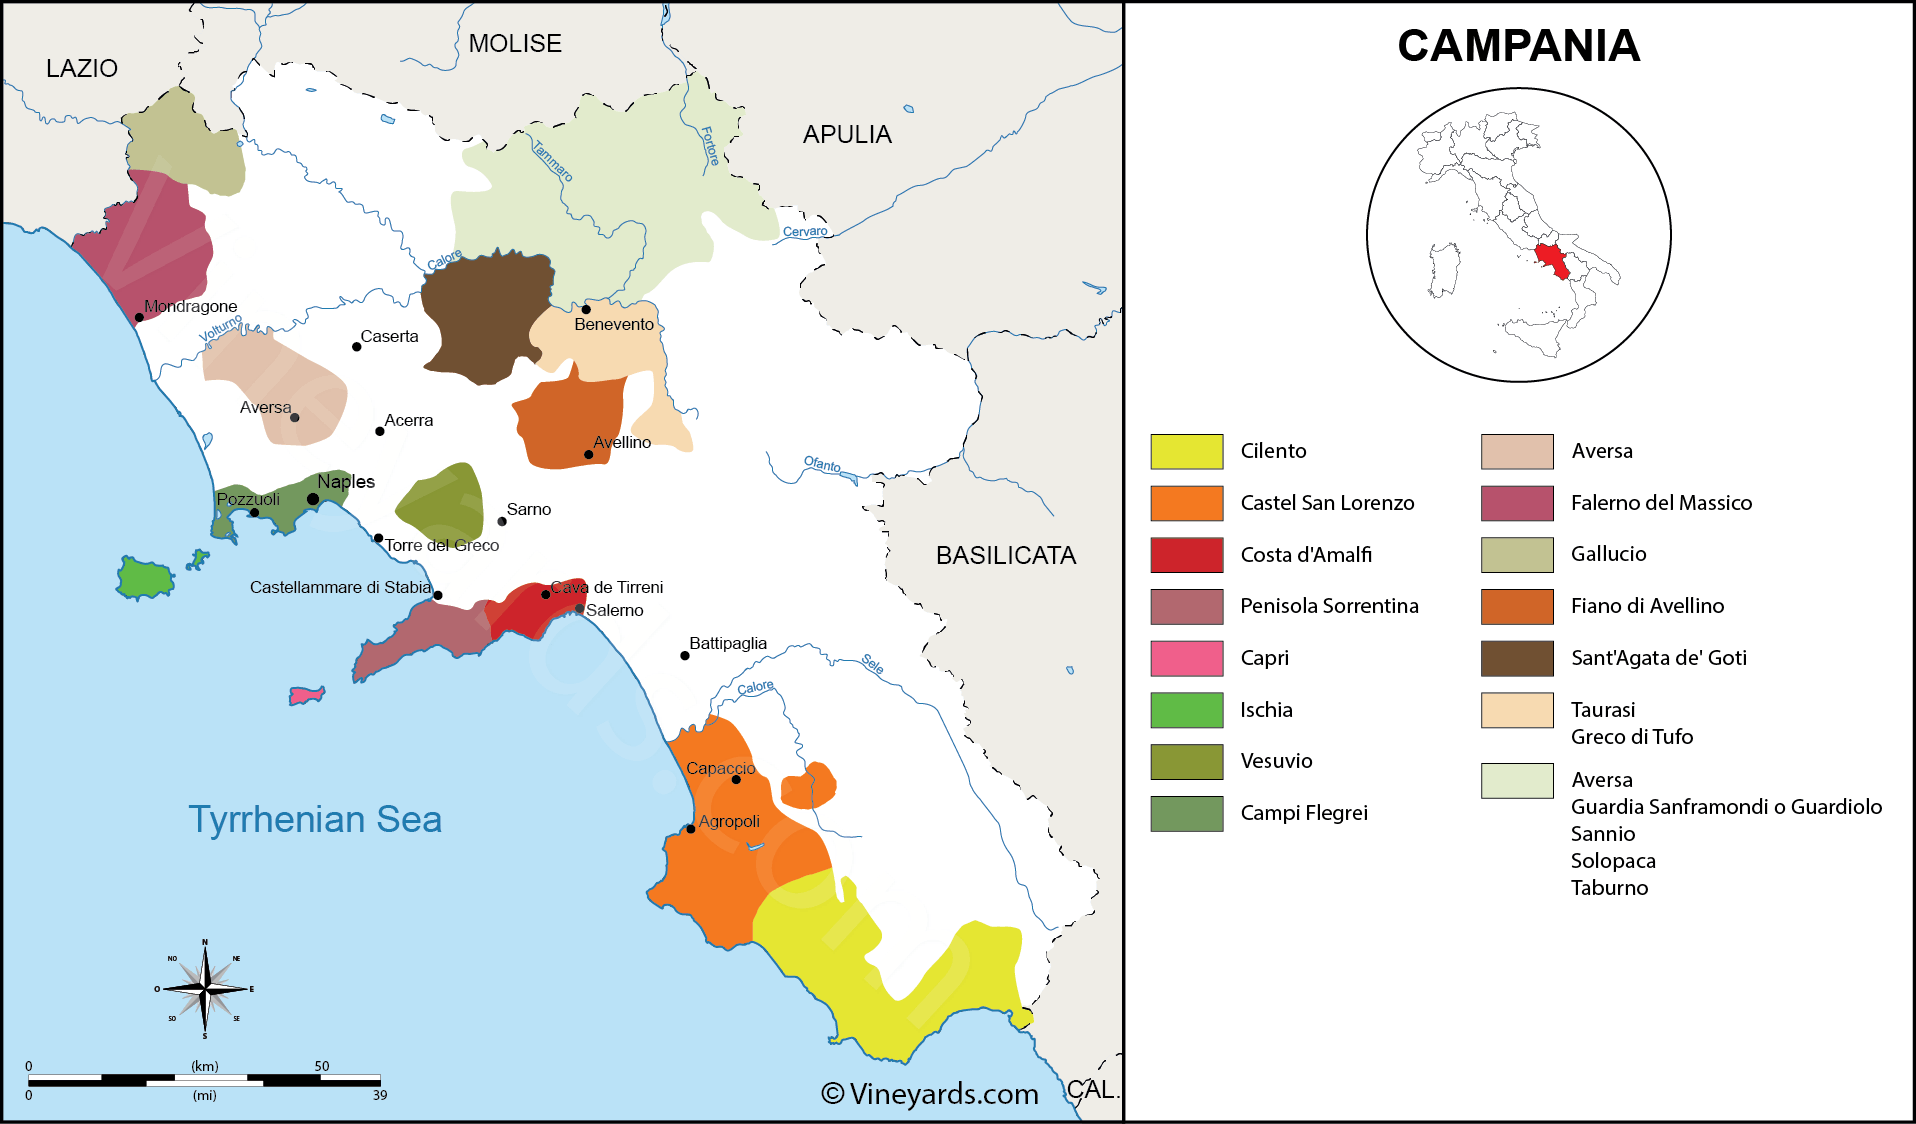 Image result for campania wine map